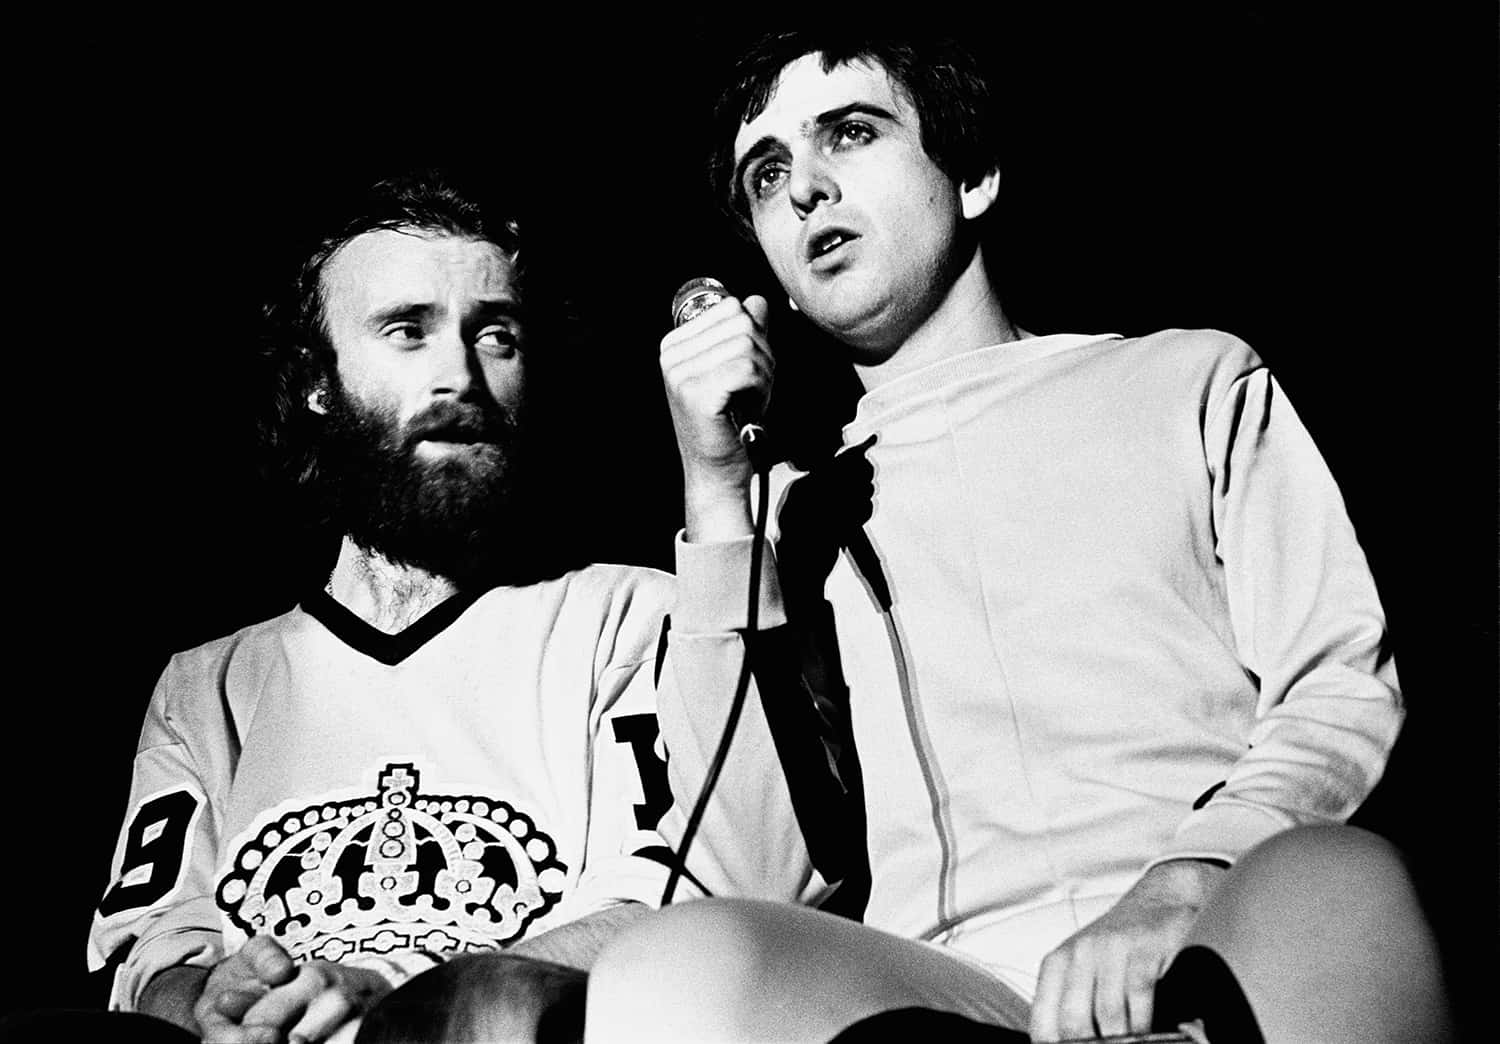 Peter Gabriel and Phil Collins